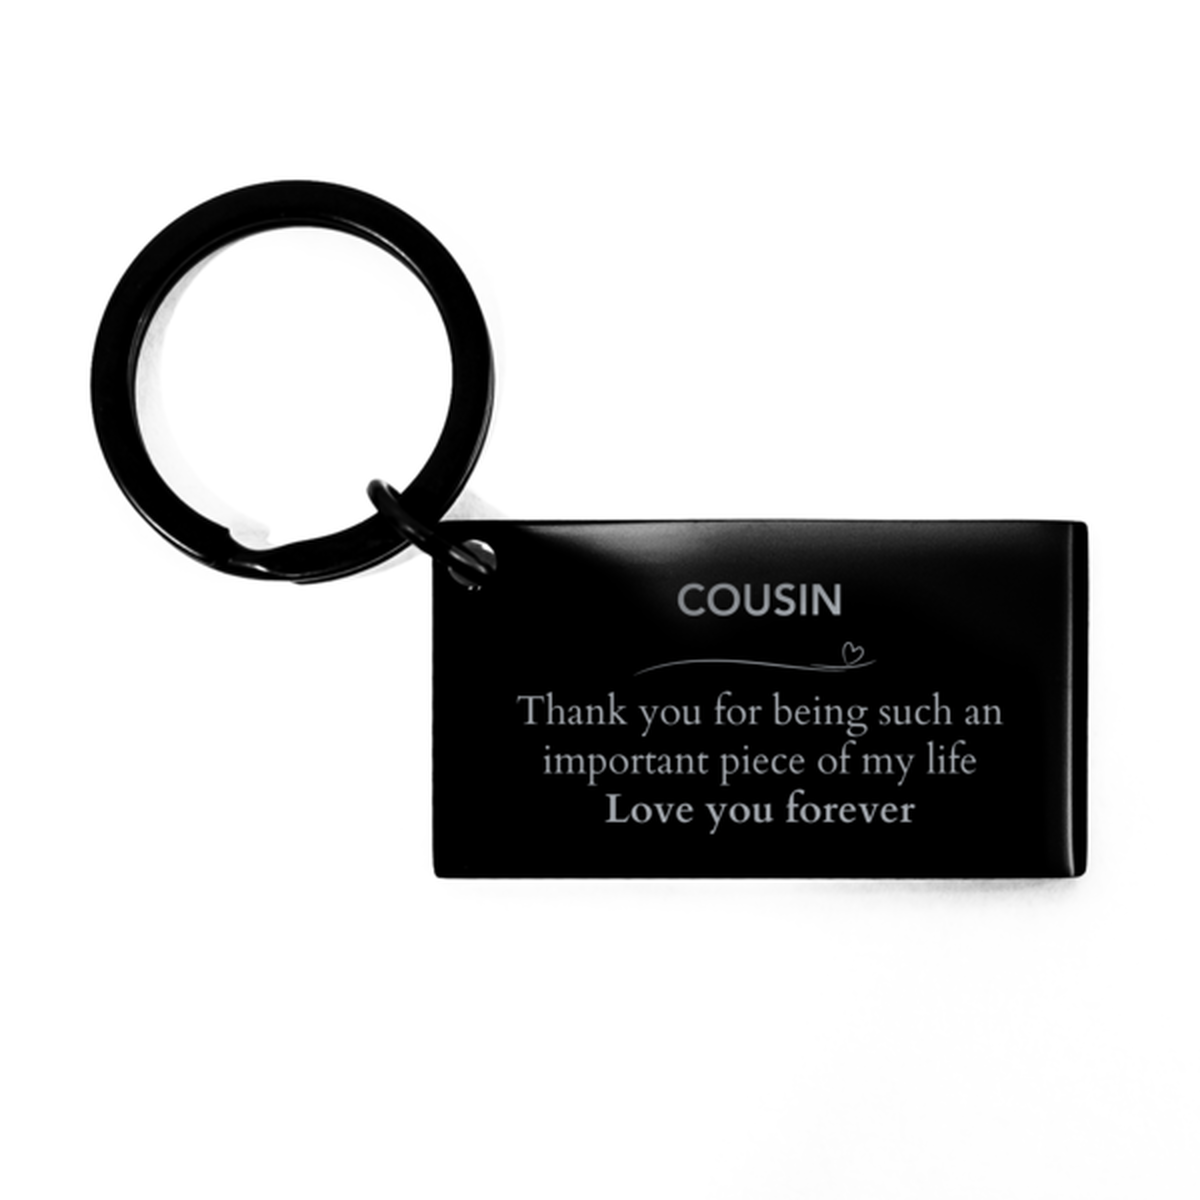 Appropriate Cousin Keychain Epic Birthday Gifts for Cousin Thank you for being such an important piece of my life Cousin Christmas Mothers Fathers Day